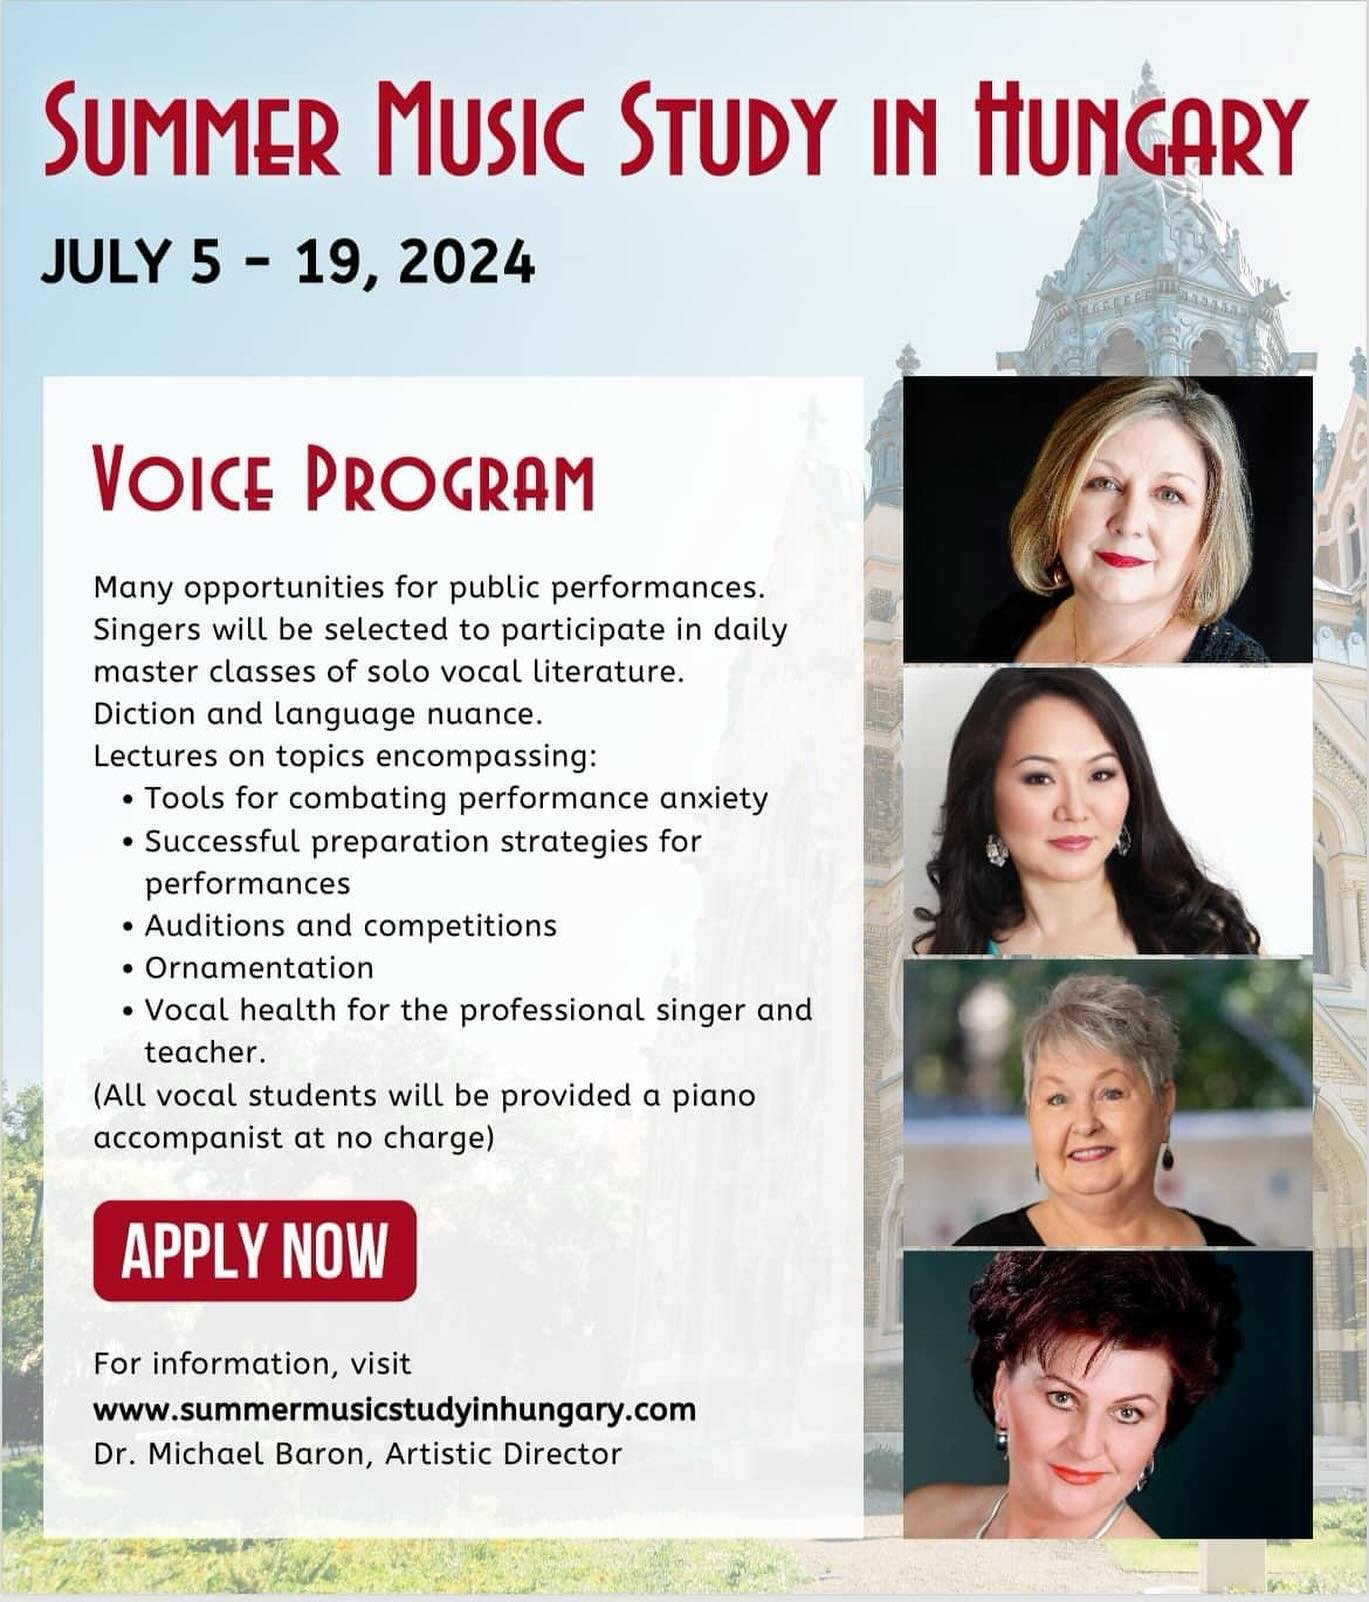 Join me for SummerMusicStudyinHungary.com
July 5-19, 2024
Deadline April 30